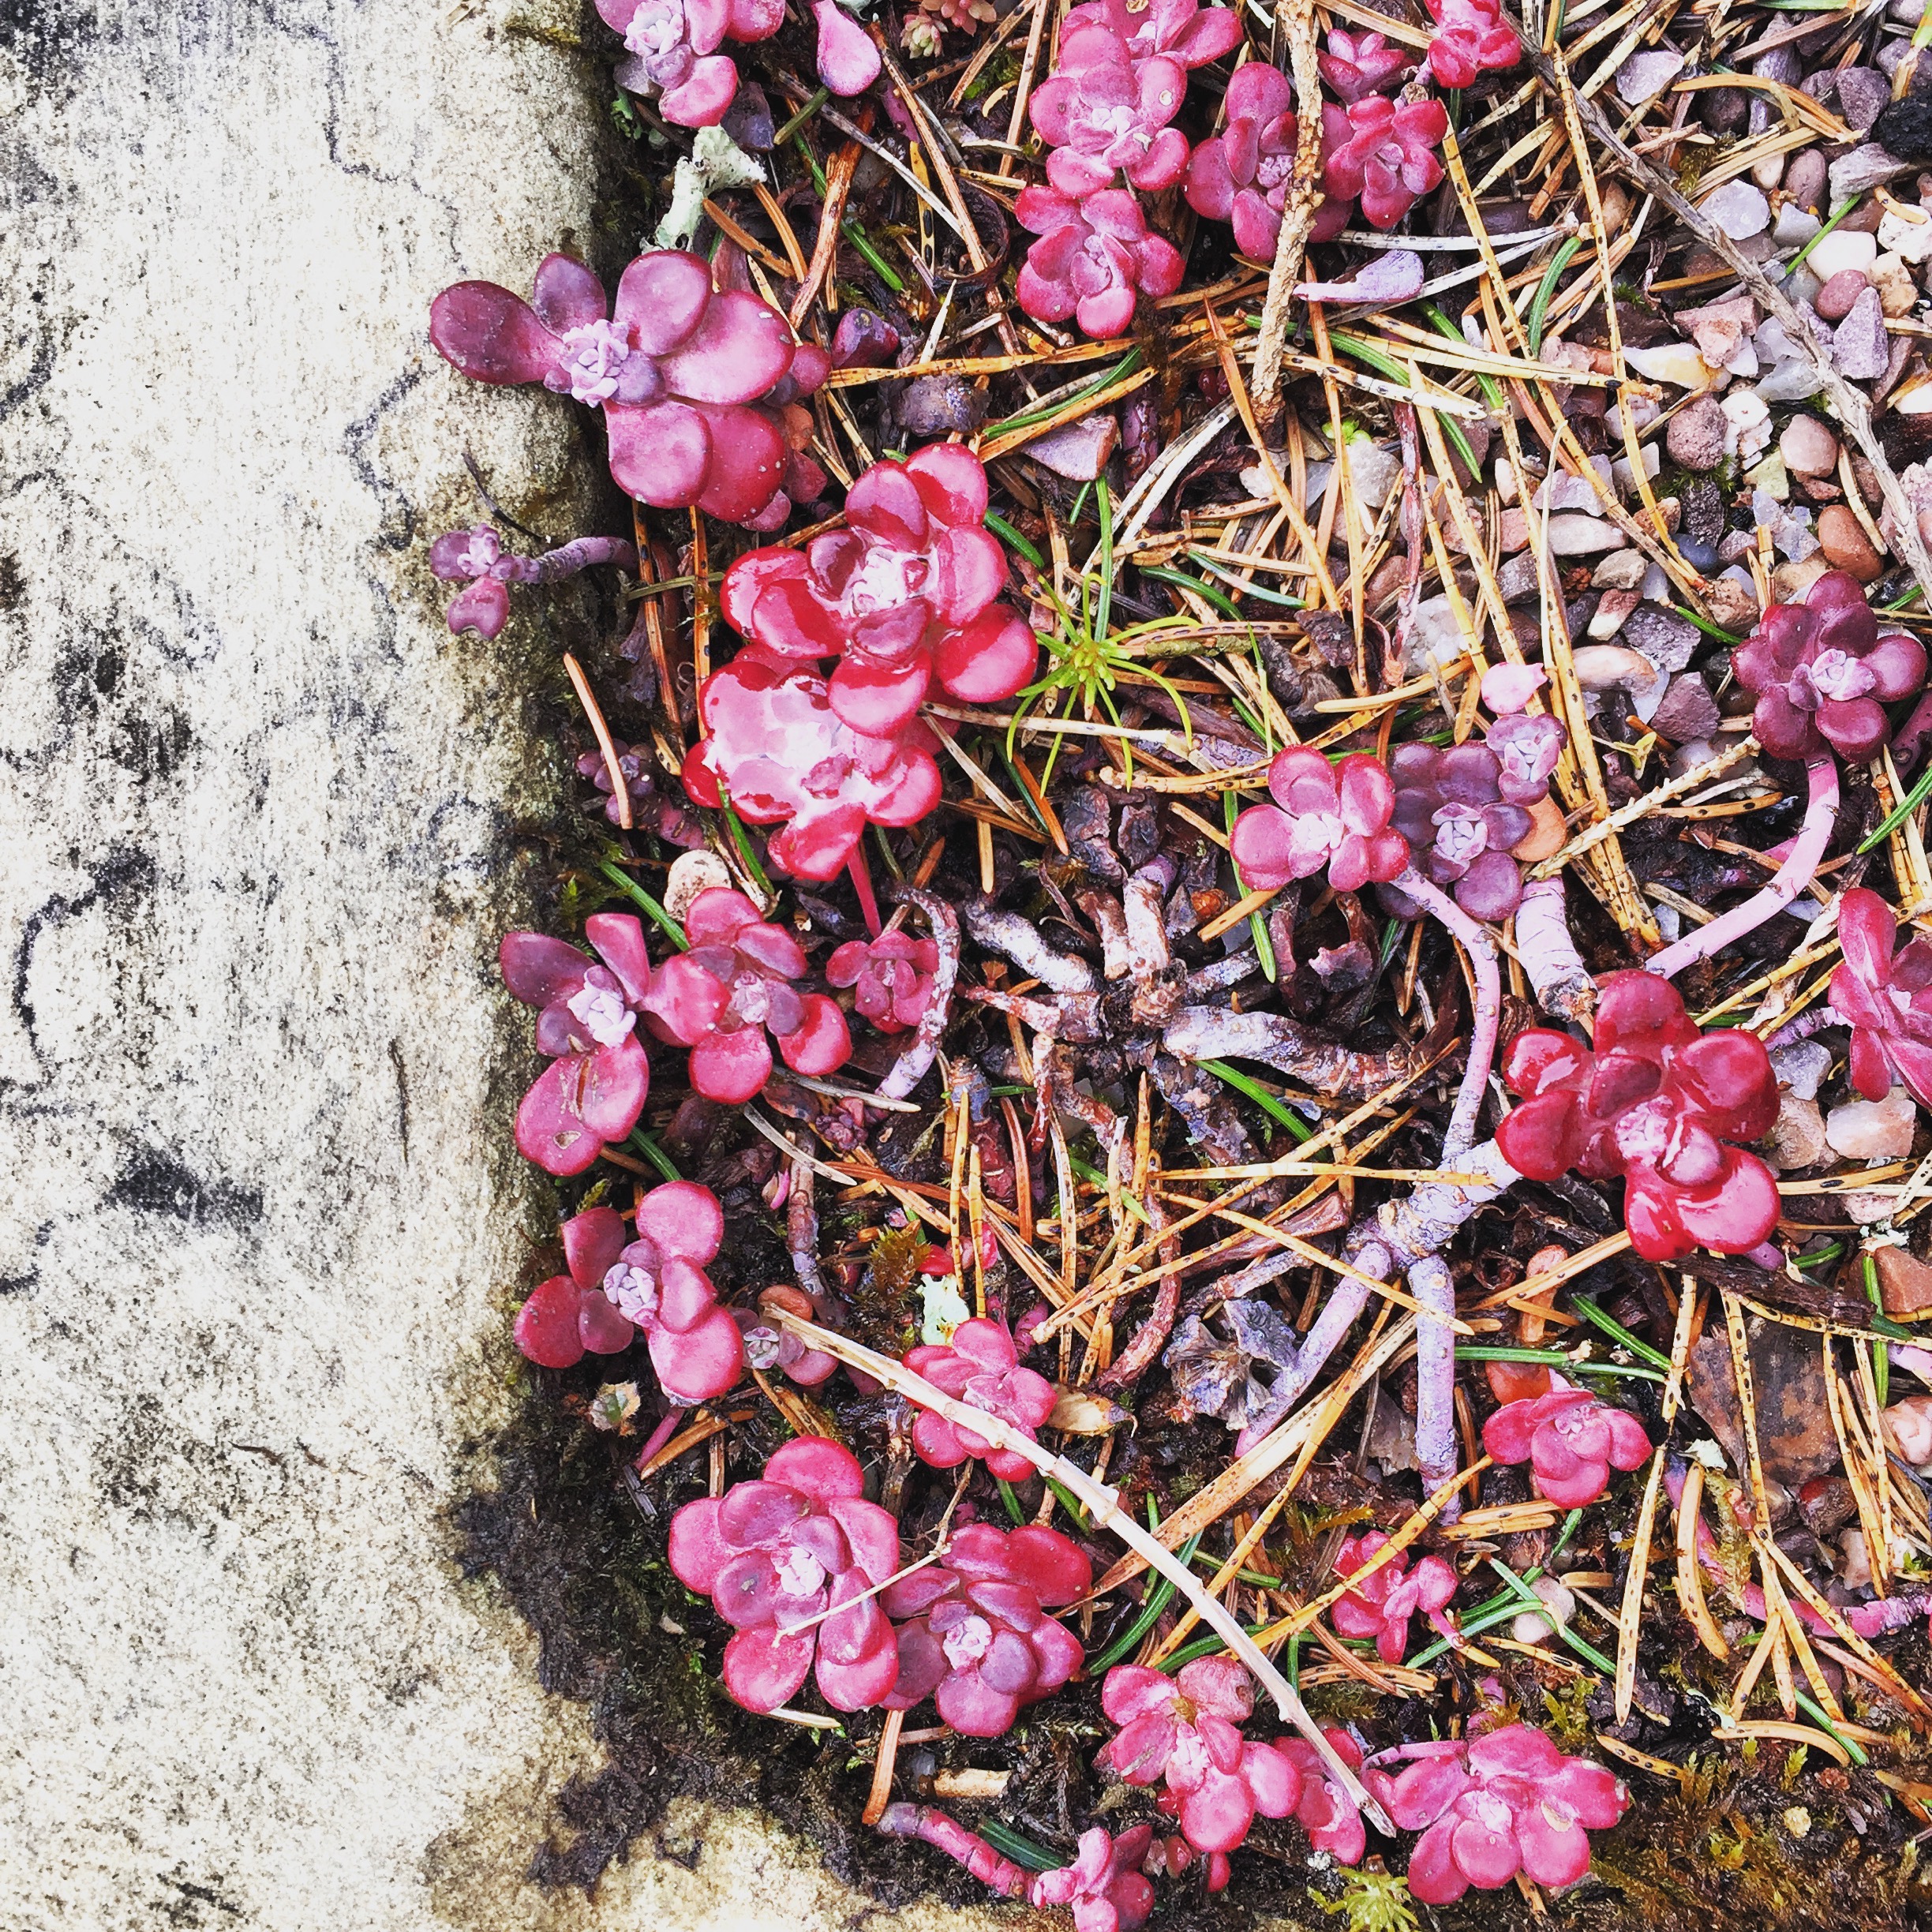 Small Pink flowers in a concrete pot